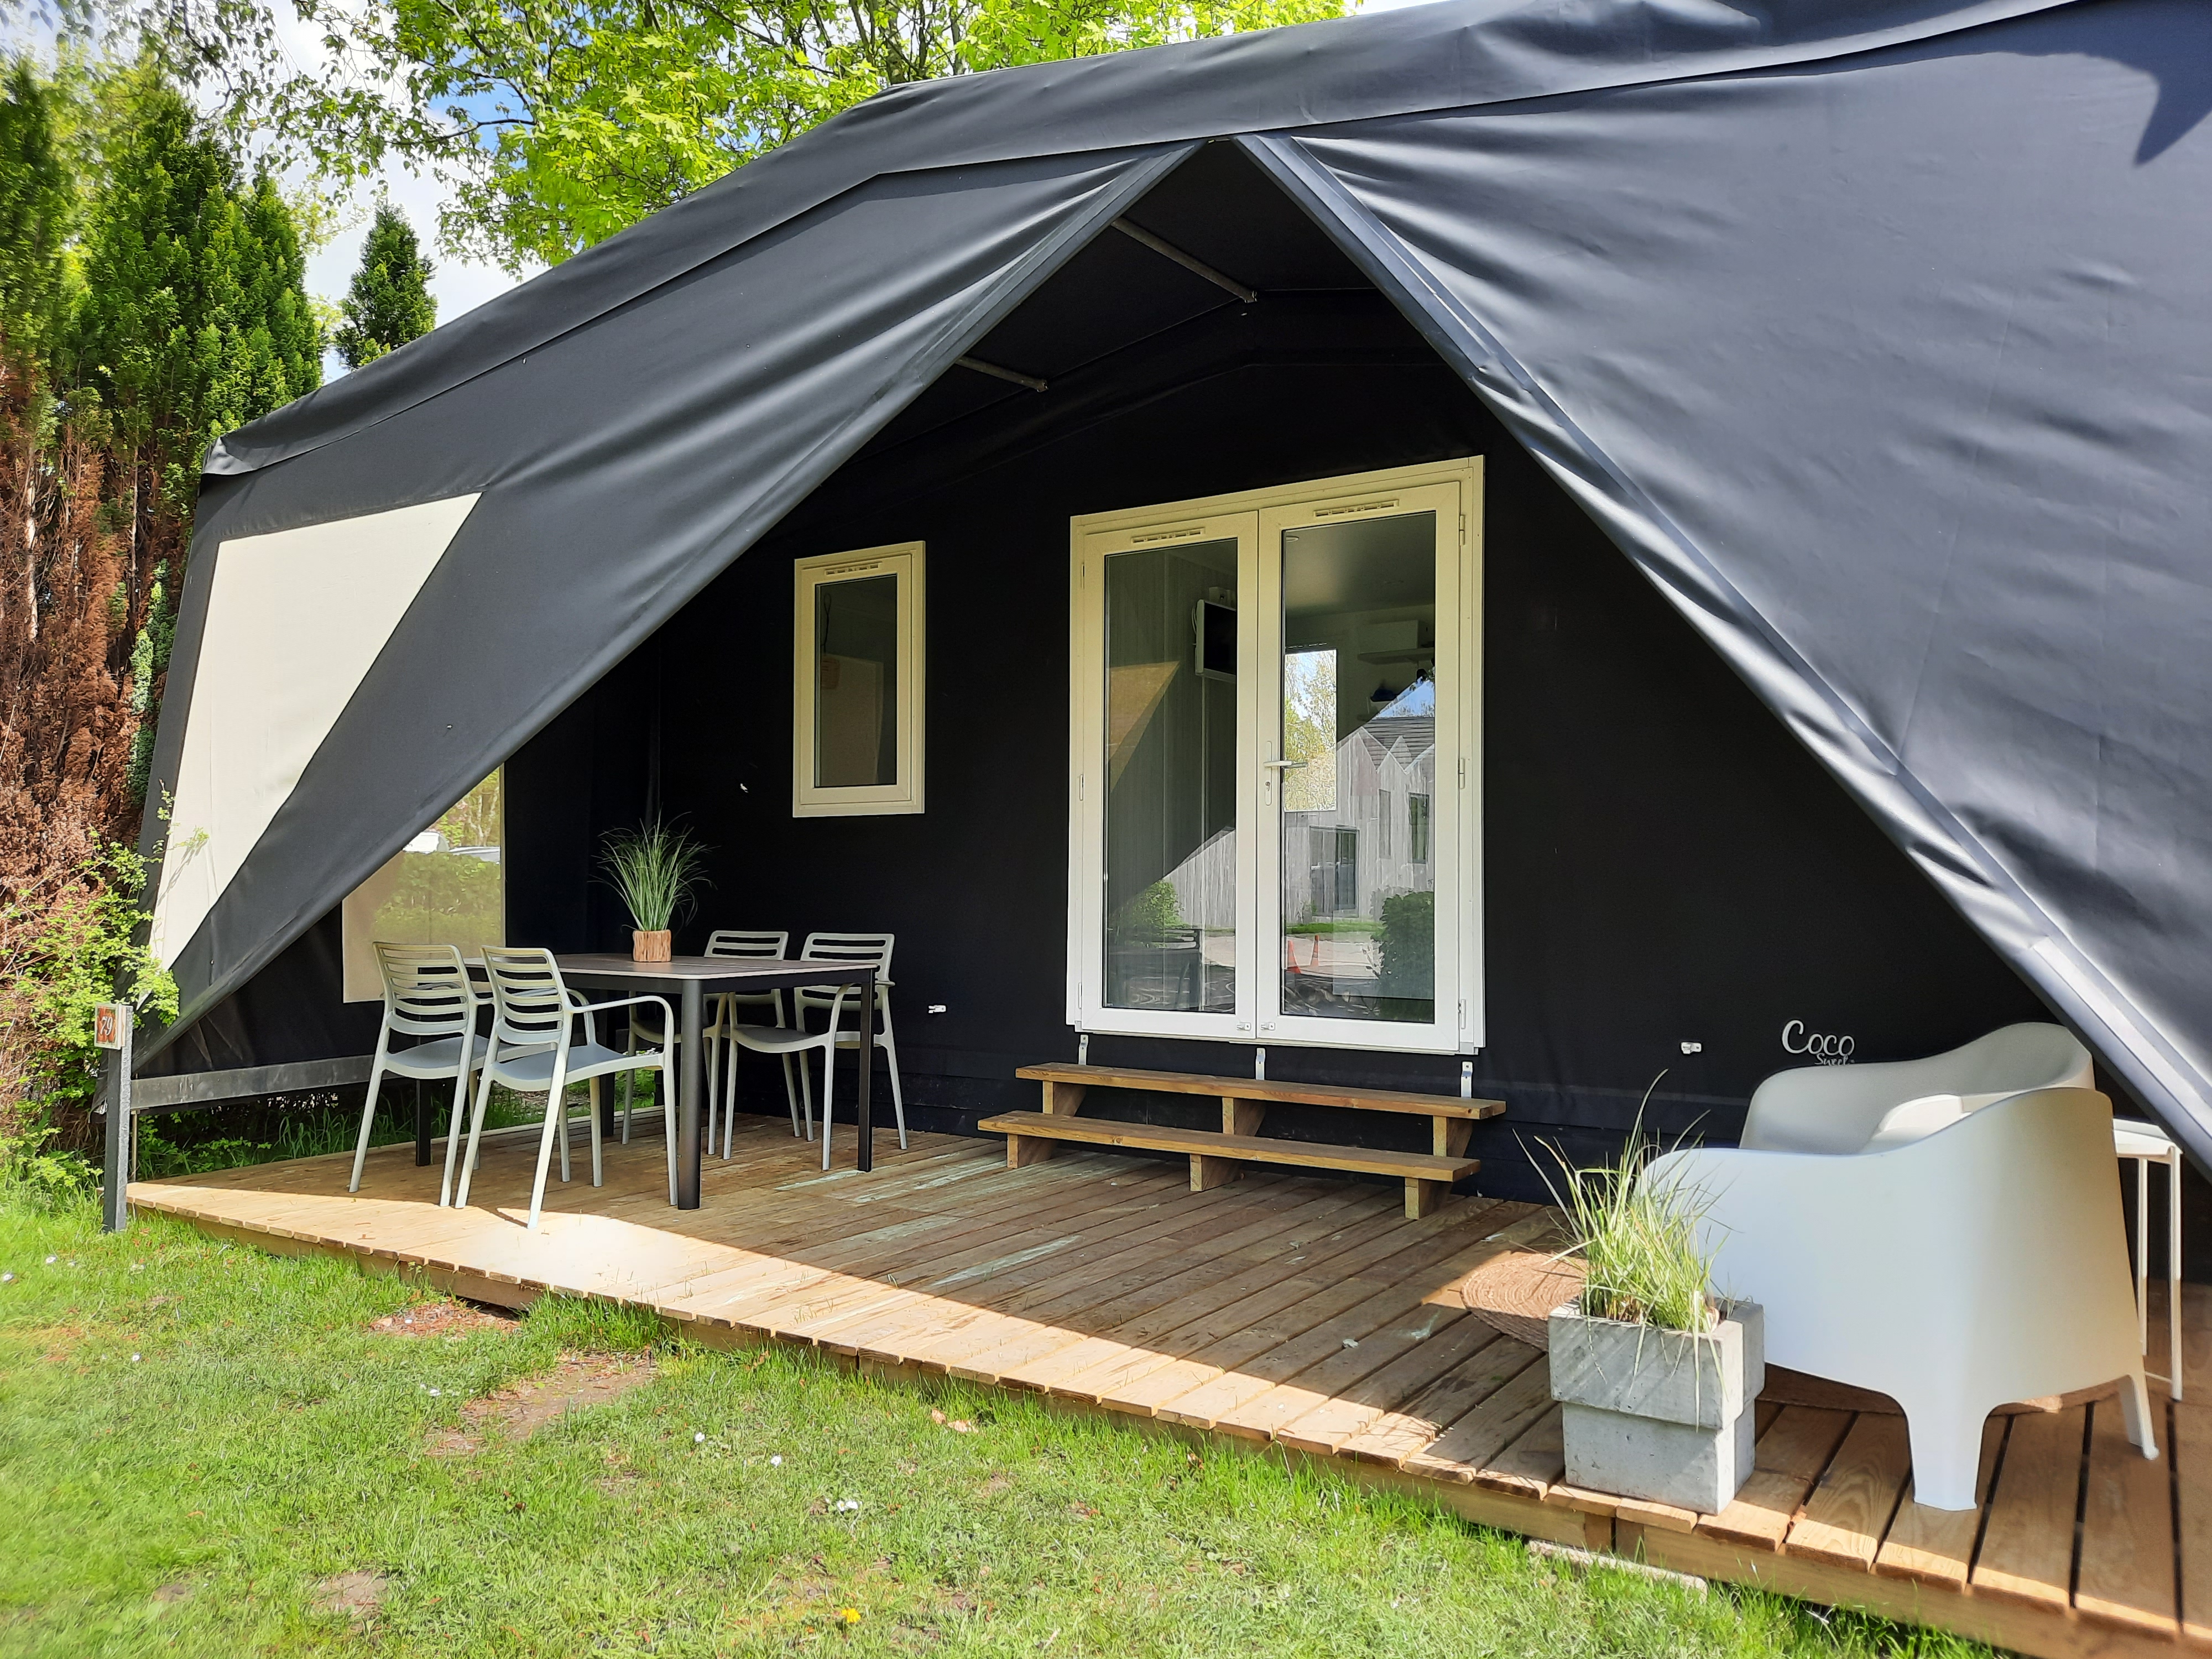 Location - Coco Sweet Deluxe - Camping Delftse Hout